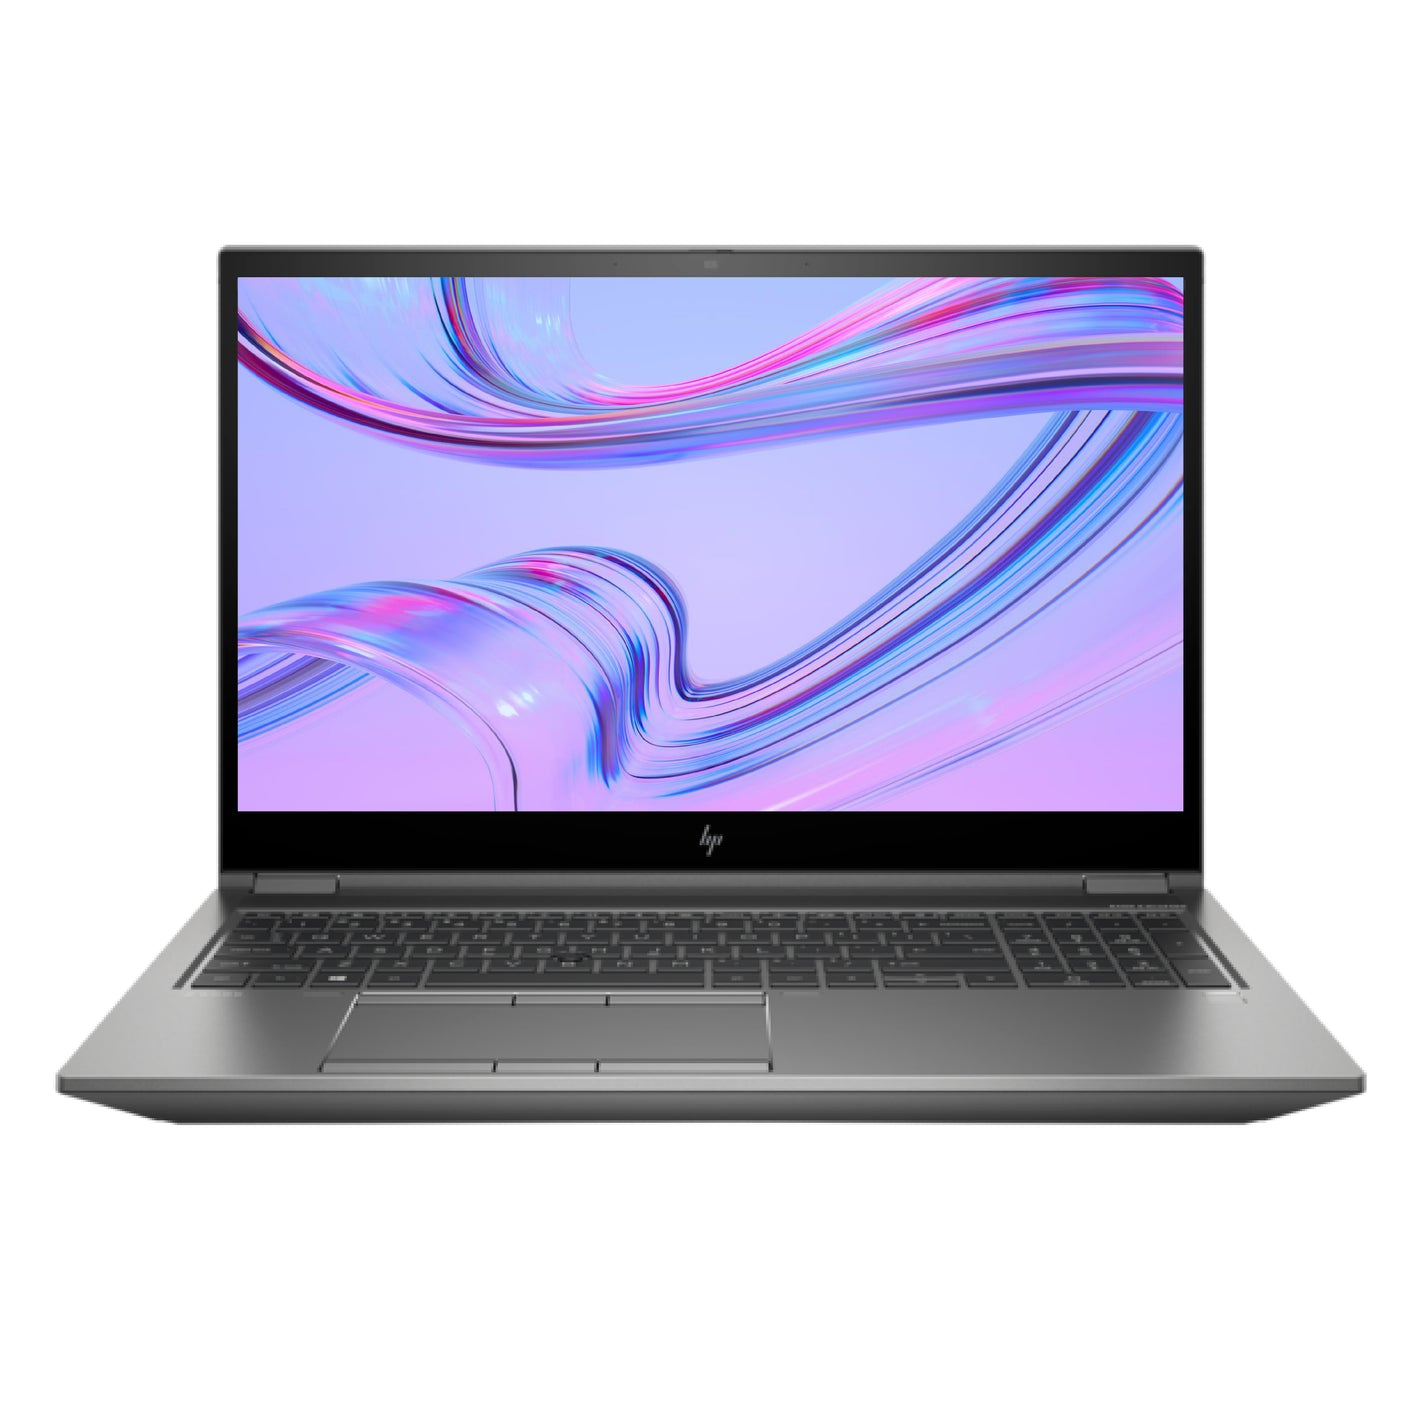 Laptop HP ZBook Fury G8, FHD 15.6-inch, Mobile Workstation, Intel Core i7-11850H, 16CPUs, 48GB Ram DDR4, NVIDIA RTX A2000 4GB, 3TB SSD (Used)